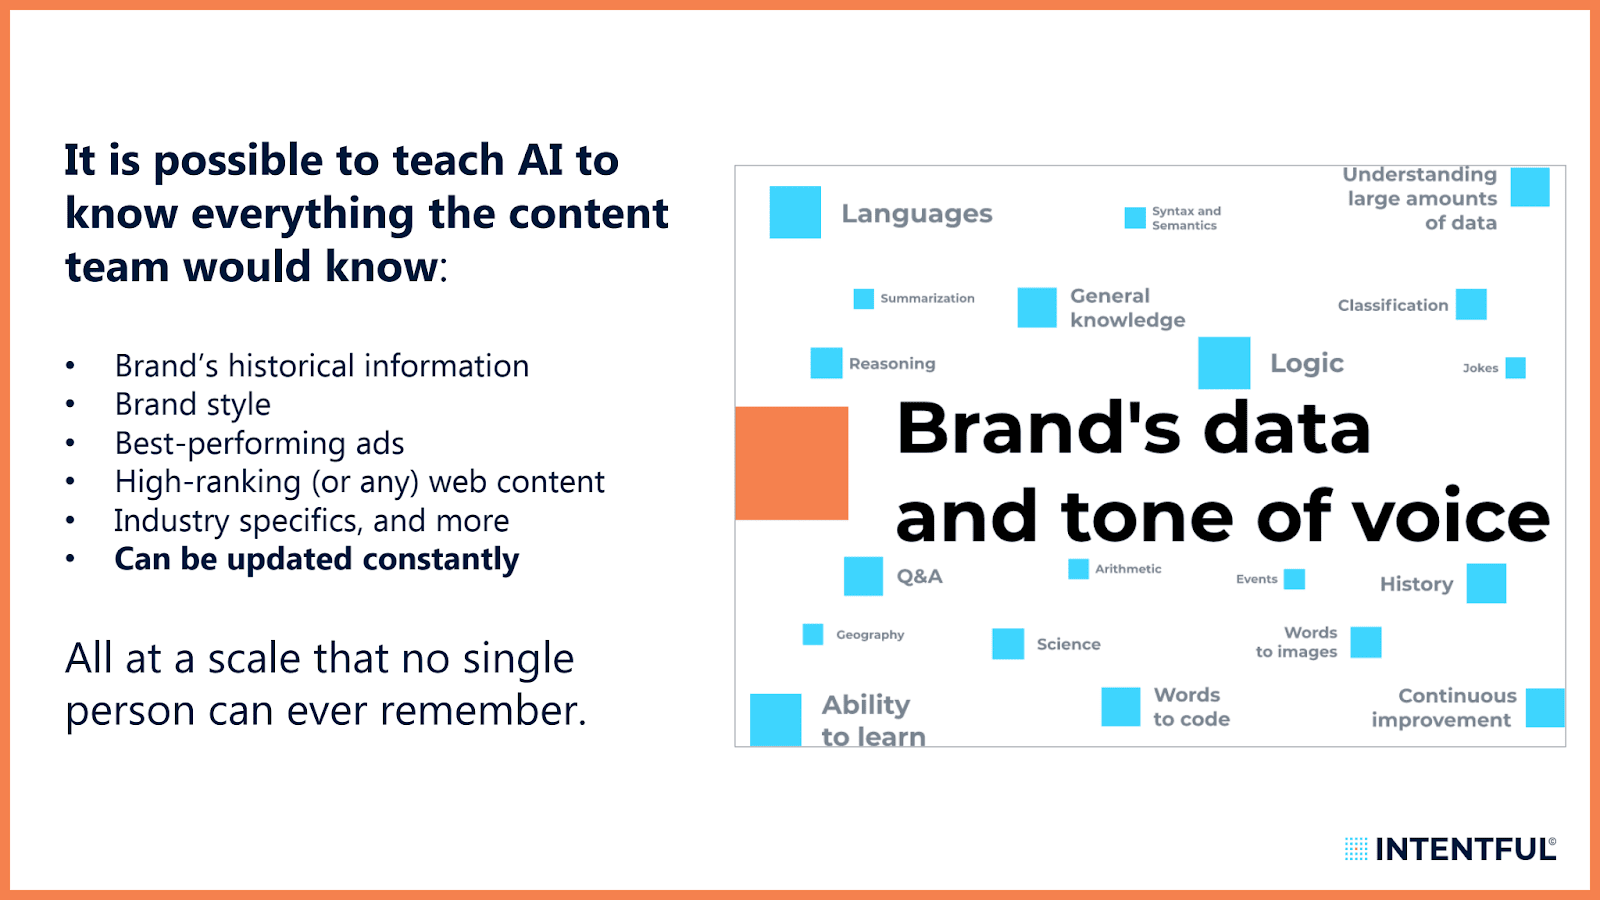 How an AI can be taught a brand's tone of voice.